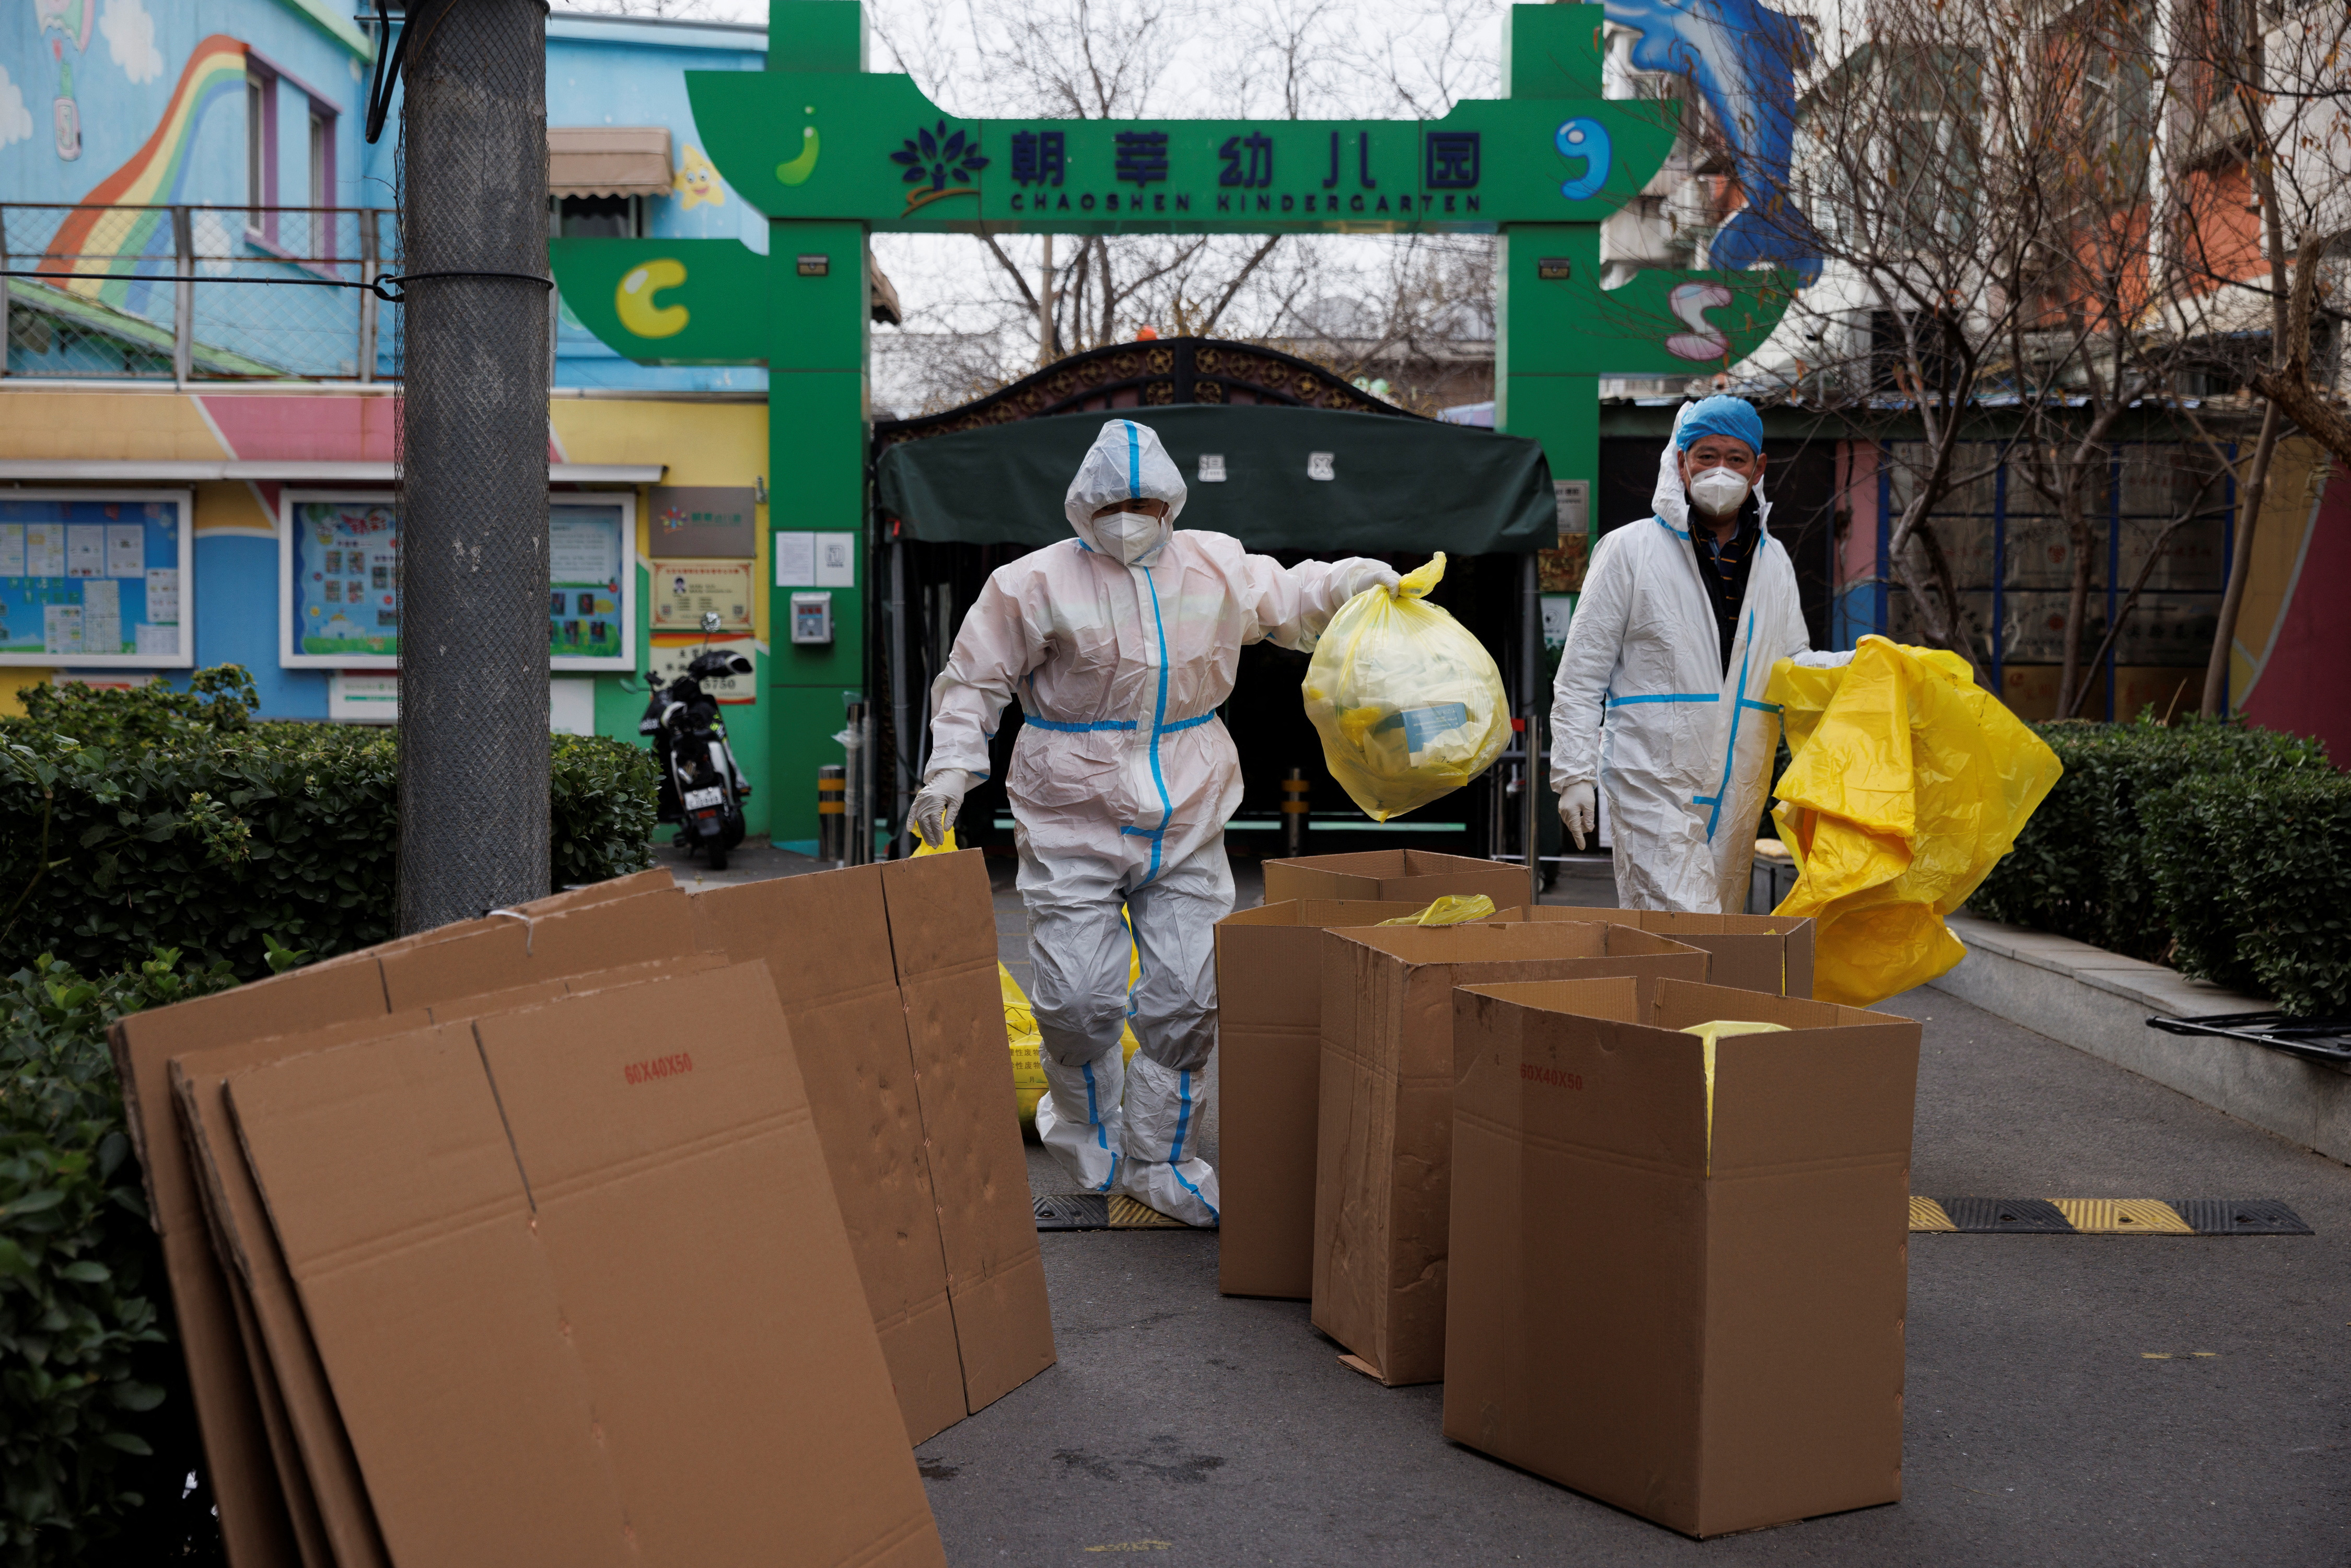 Epidemic prevention workers in protective suits put medical waste into boxes in a residential compound as outbreaks of the coronavirus disease (COVID-19) continue in Beijing